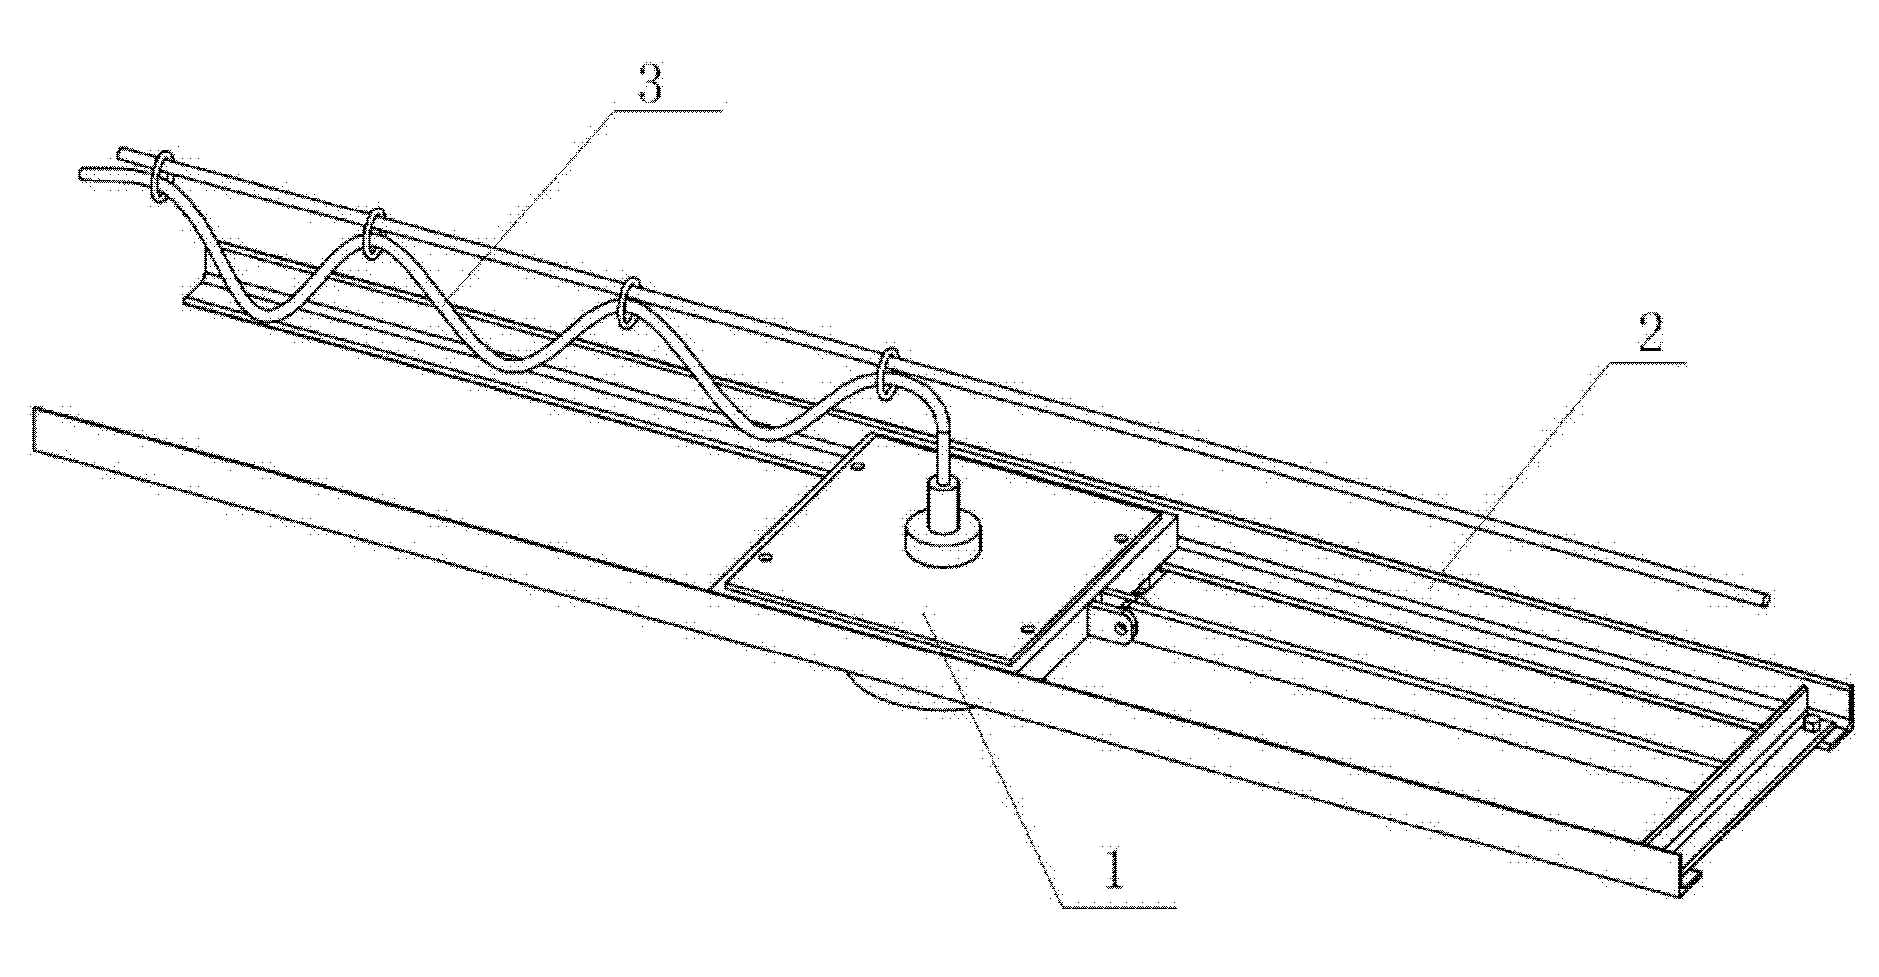 Self-propelled positioning and level measuring device on basis of complicated mineral separation environments